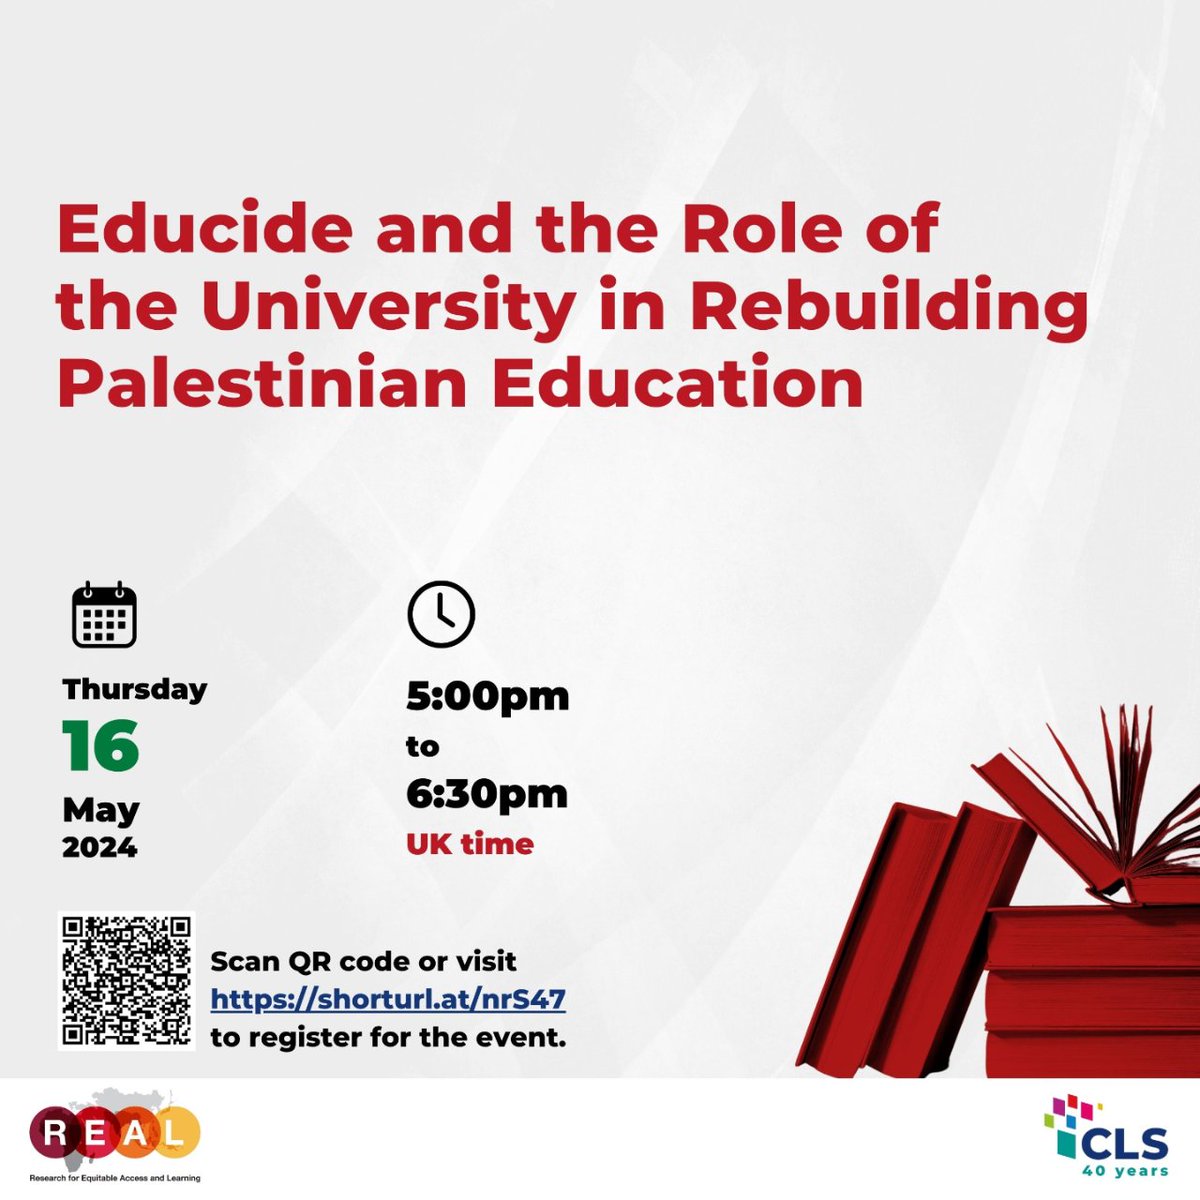 We are pleased to be hosting @hzomlot in keynote address on: Educide and the Role of the University in Rebuilding the Palestinian Education System.  May 16 · 5-6:30pm UK in person only Register now: eventbrite.co.uk/e/educide-and-… Organized with @REAL_Centre